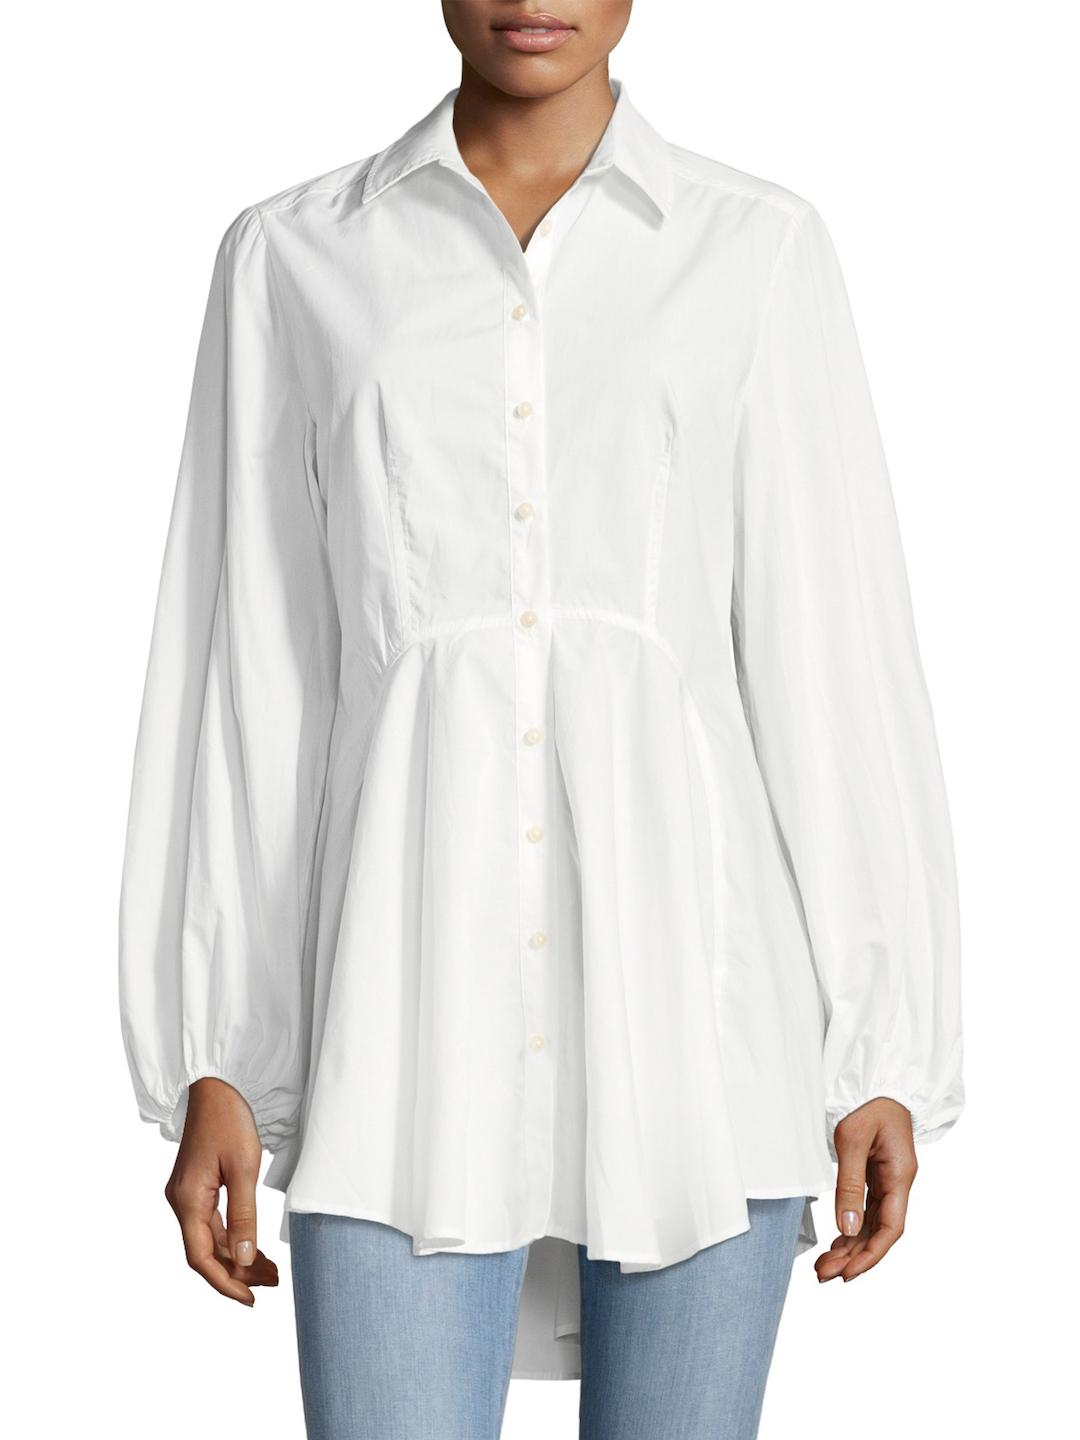 FREE PEOPLE All The Time New Tunic White Peplum Top – Pit-a-Pats.com